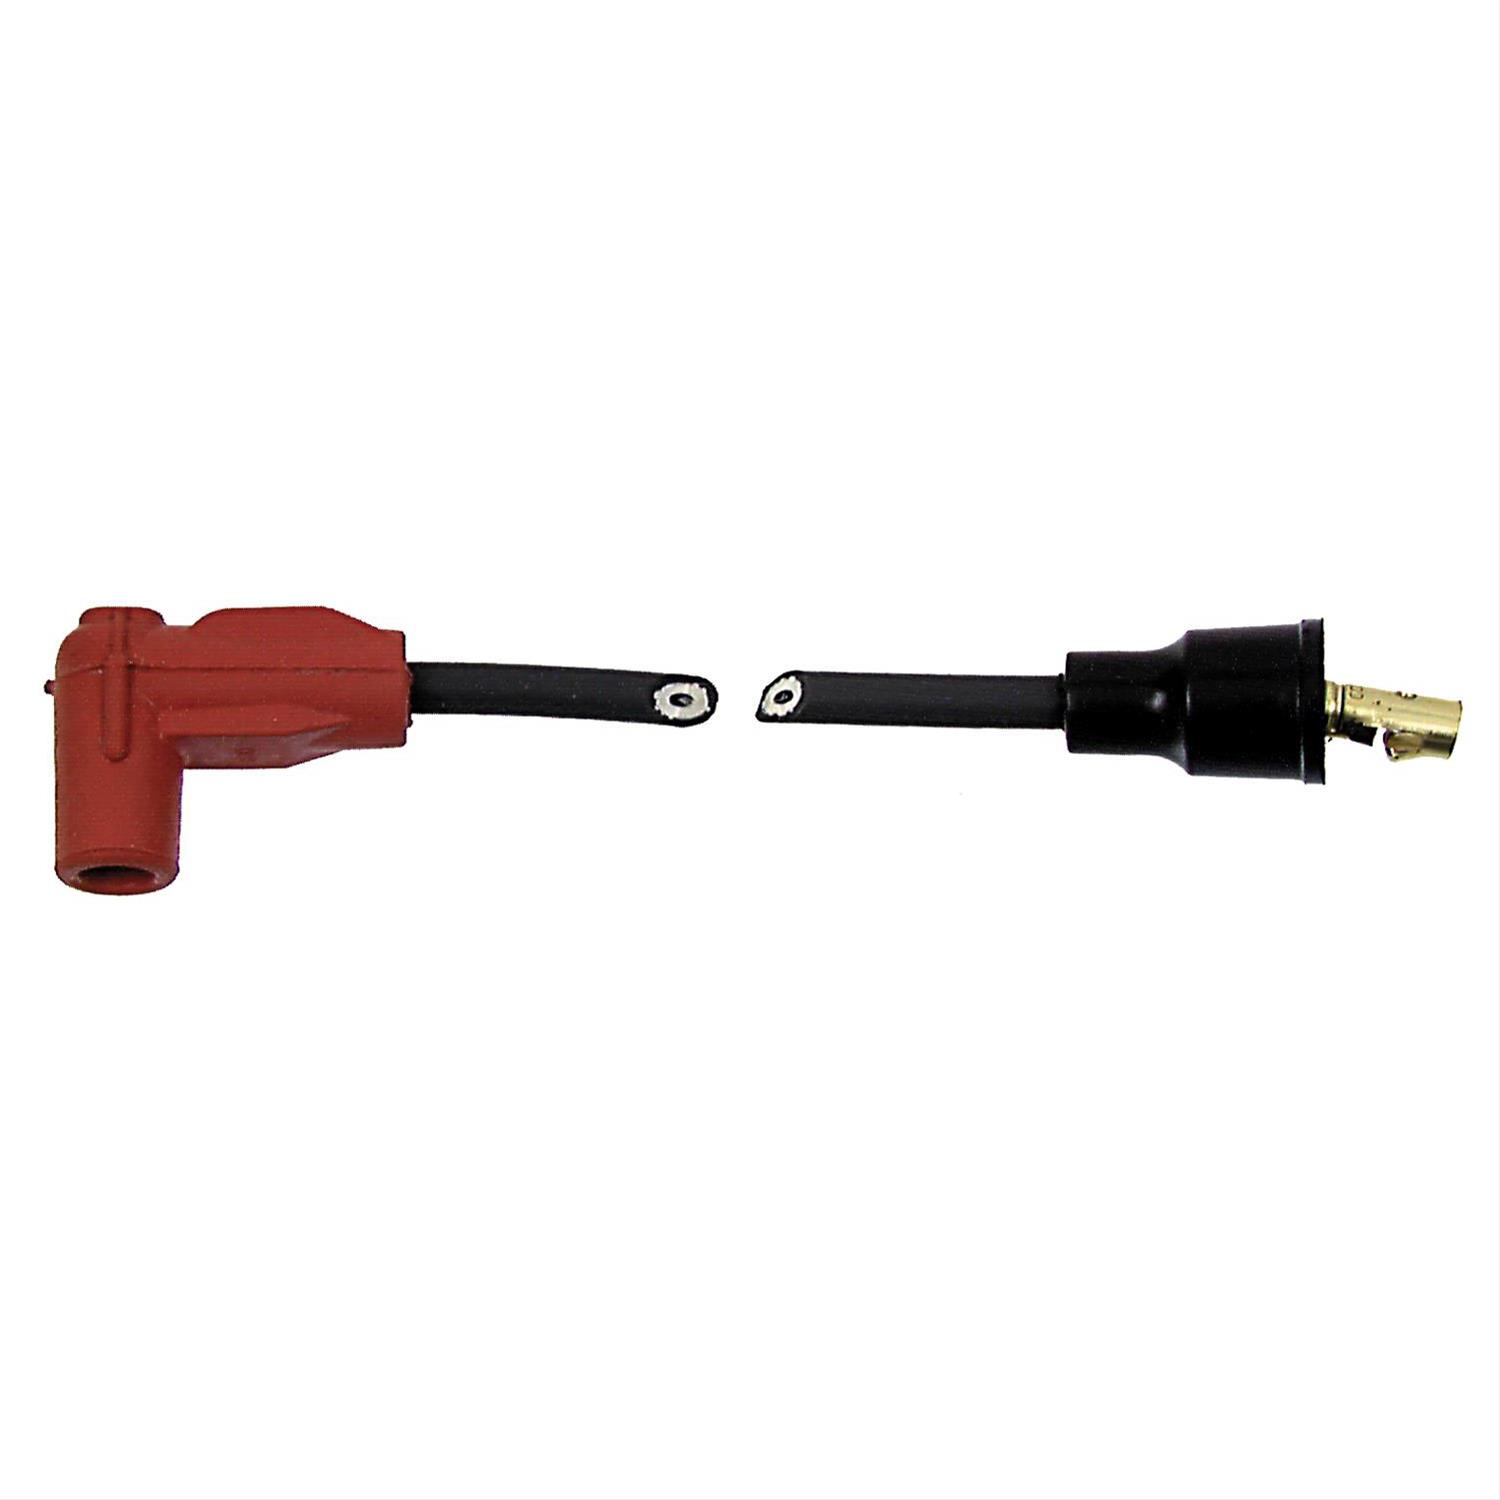 Standard Motor Products 749M Power Lead Standard Ignition 749M-STD 